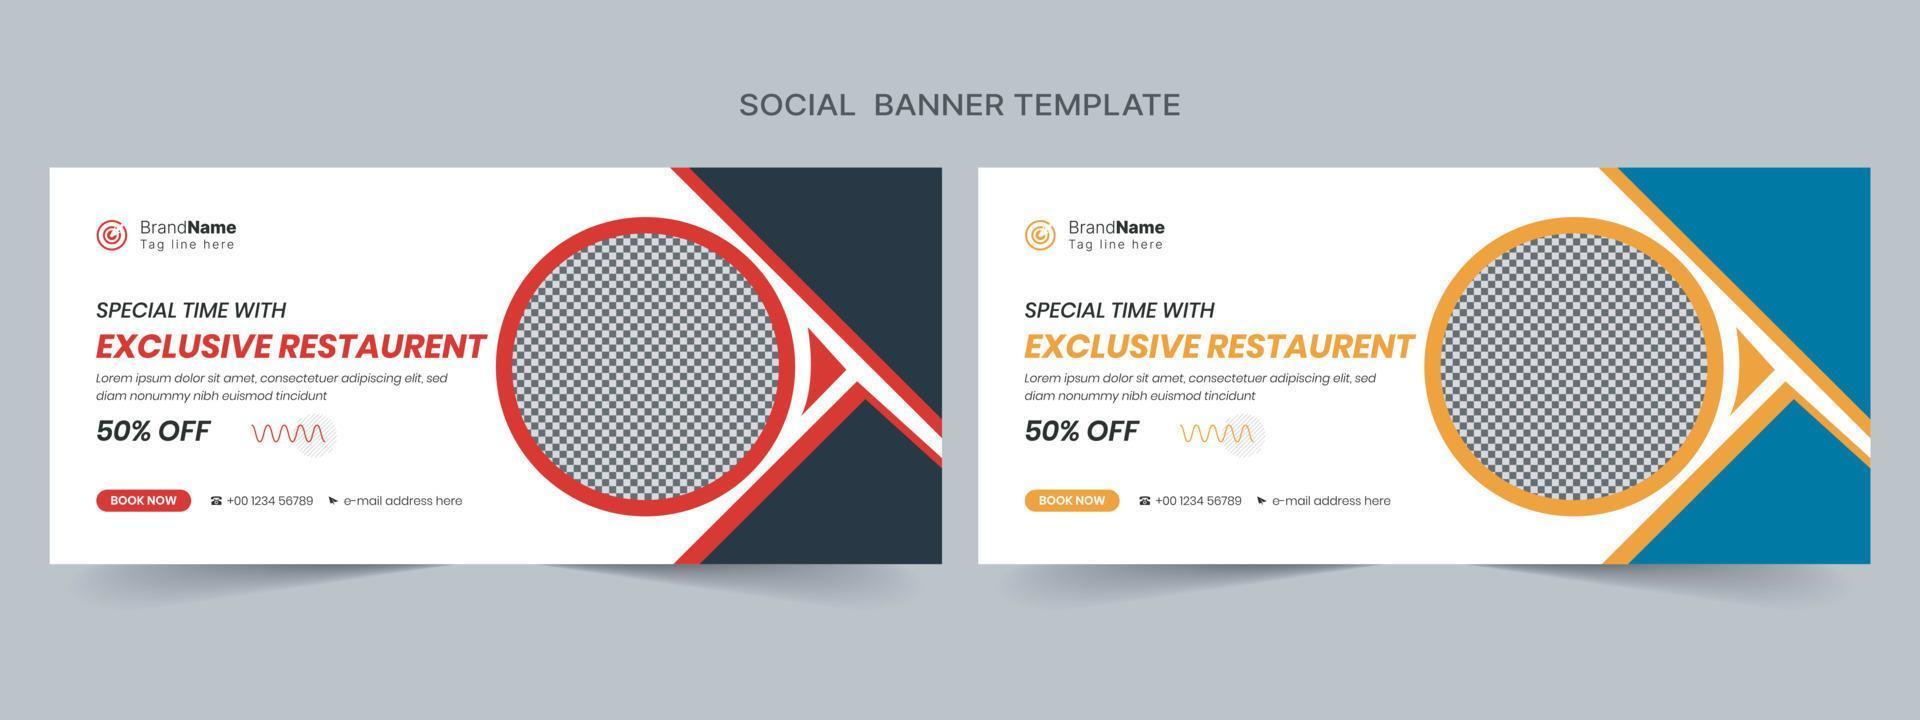 Social Media Post And Web Banner Template Design, Fully Editable. vector